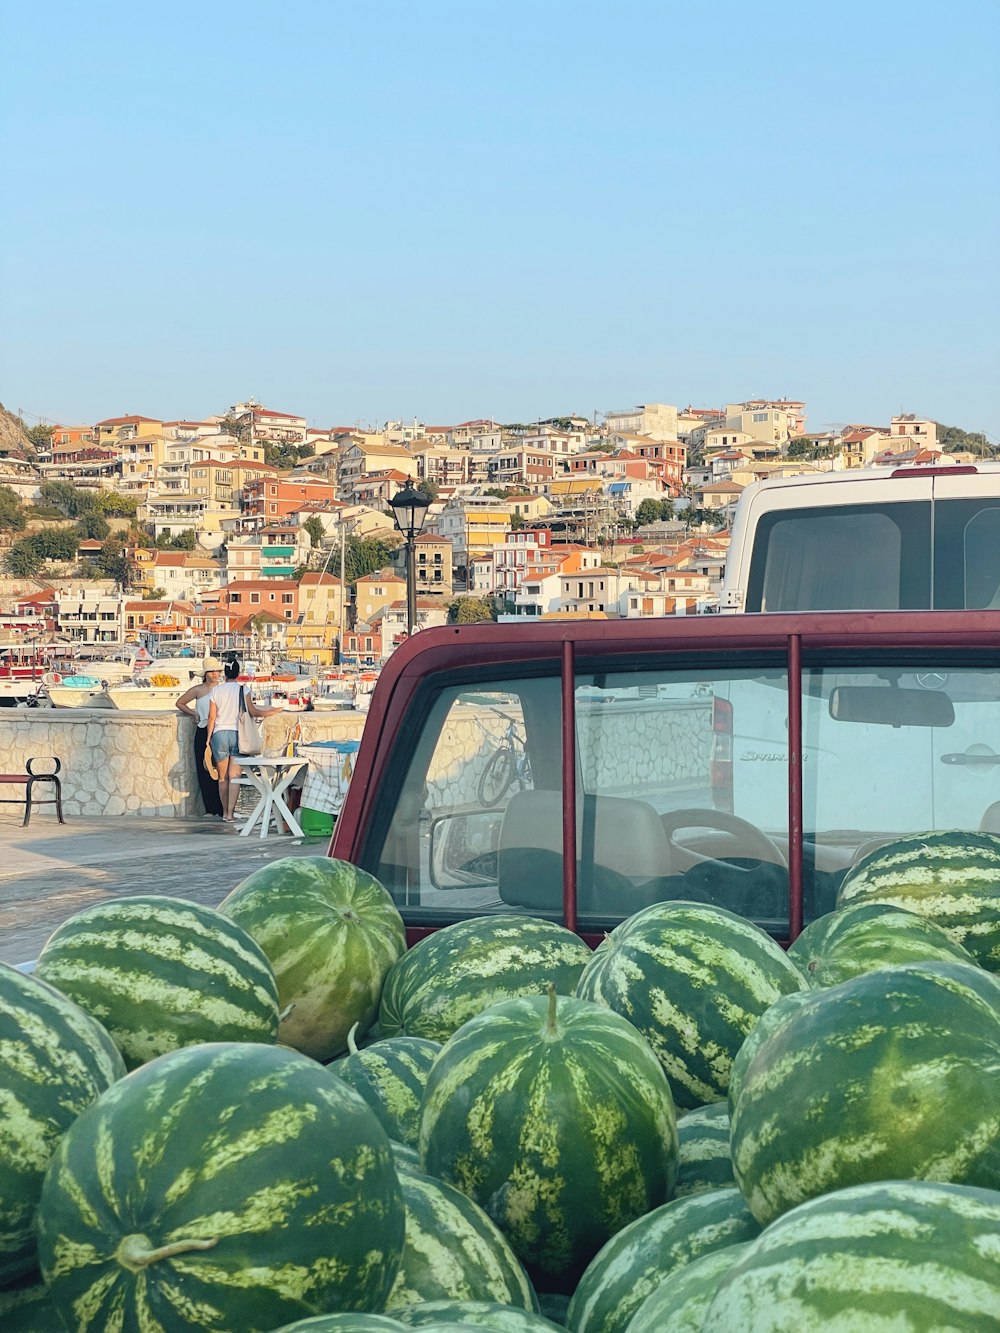 a van parked on a street with watermelons on the side